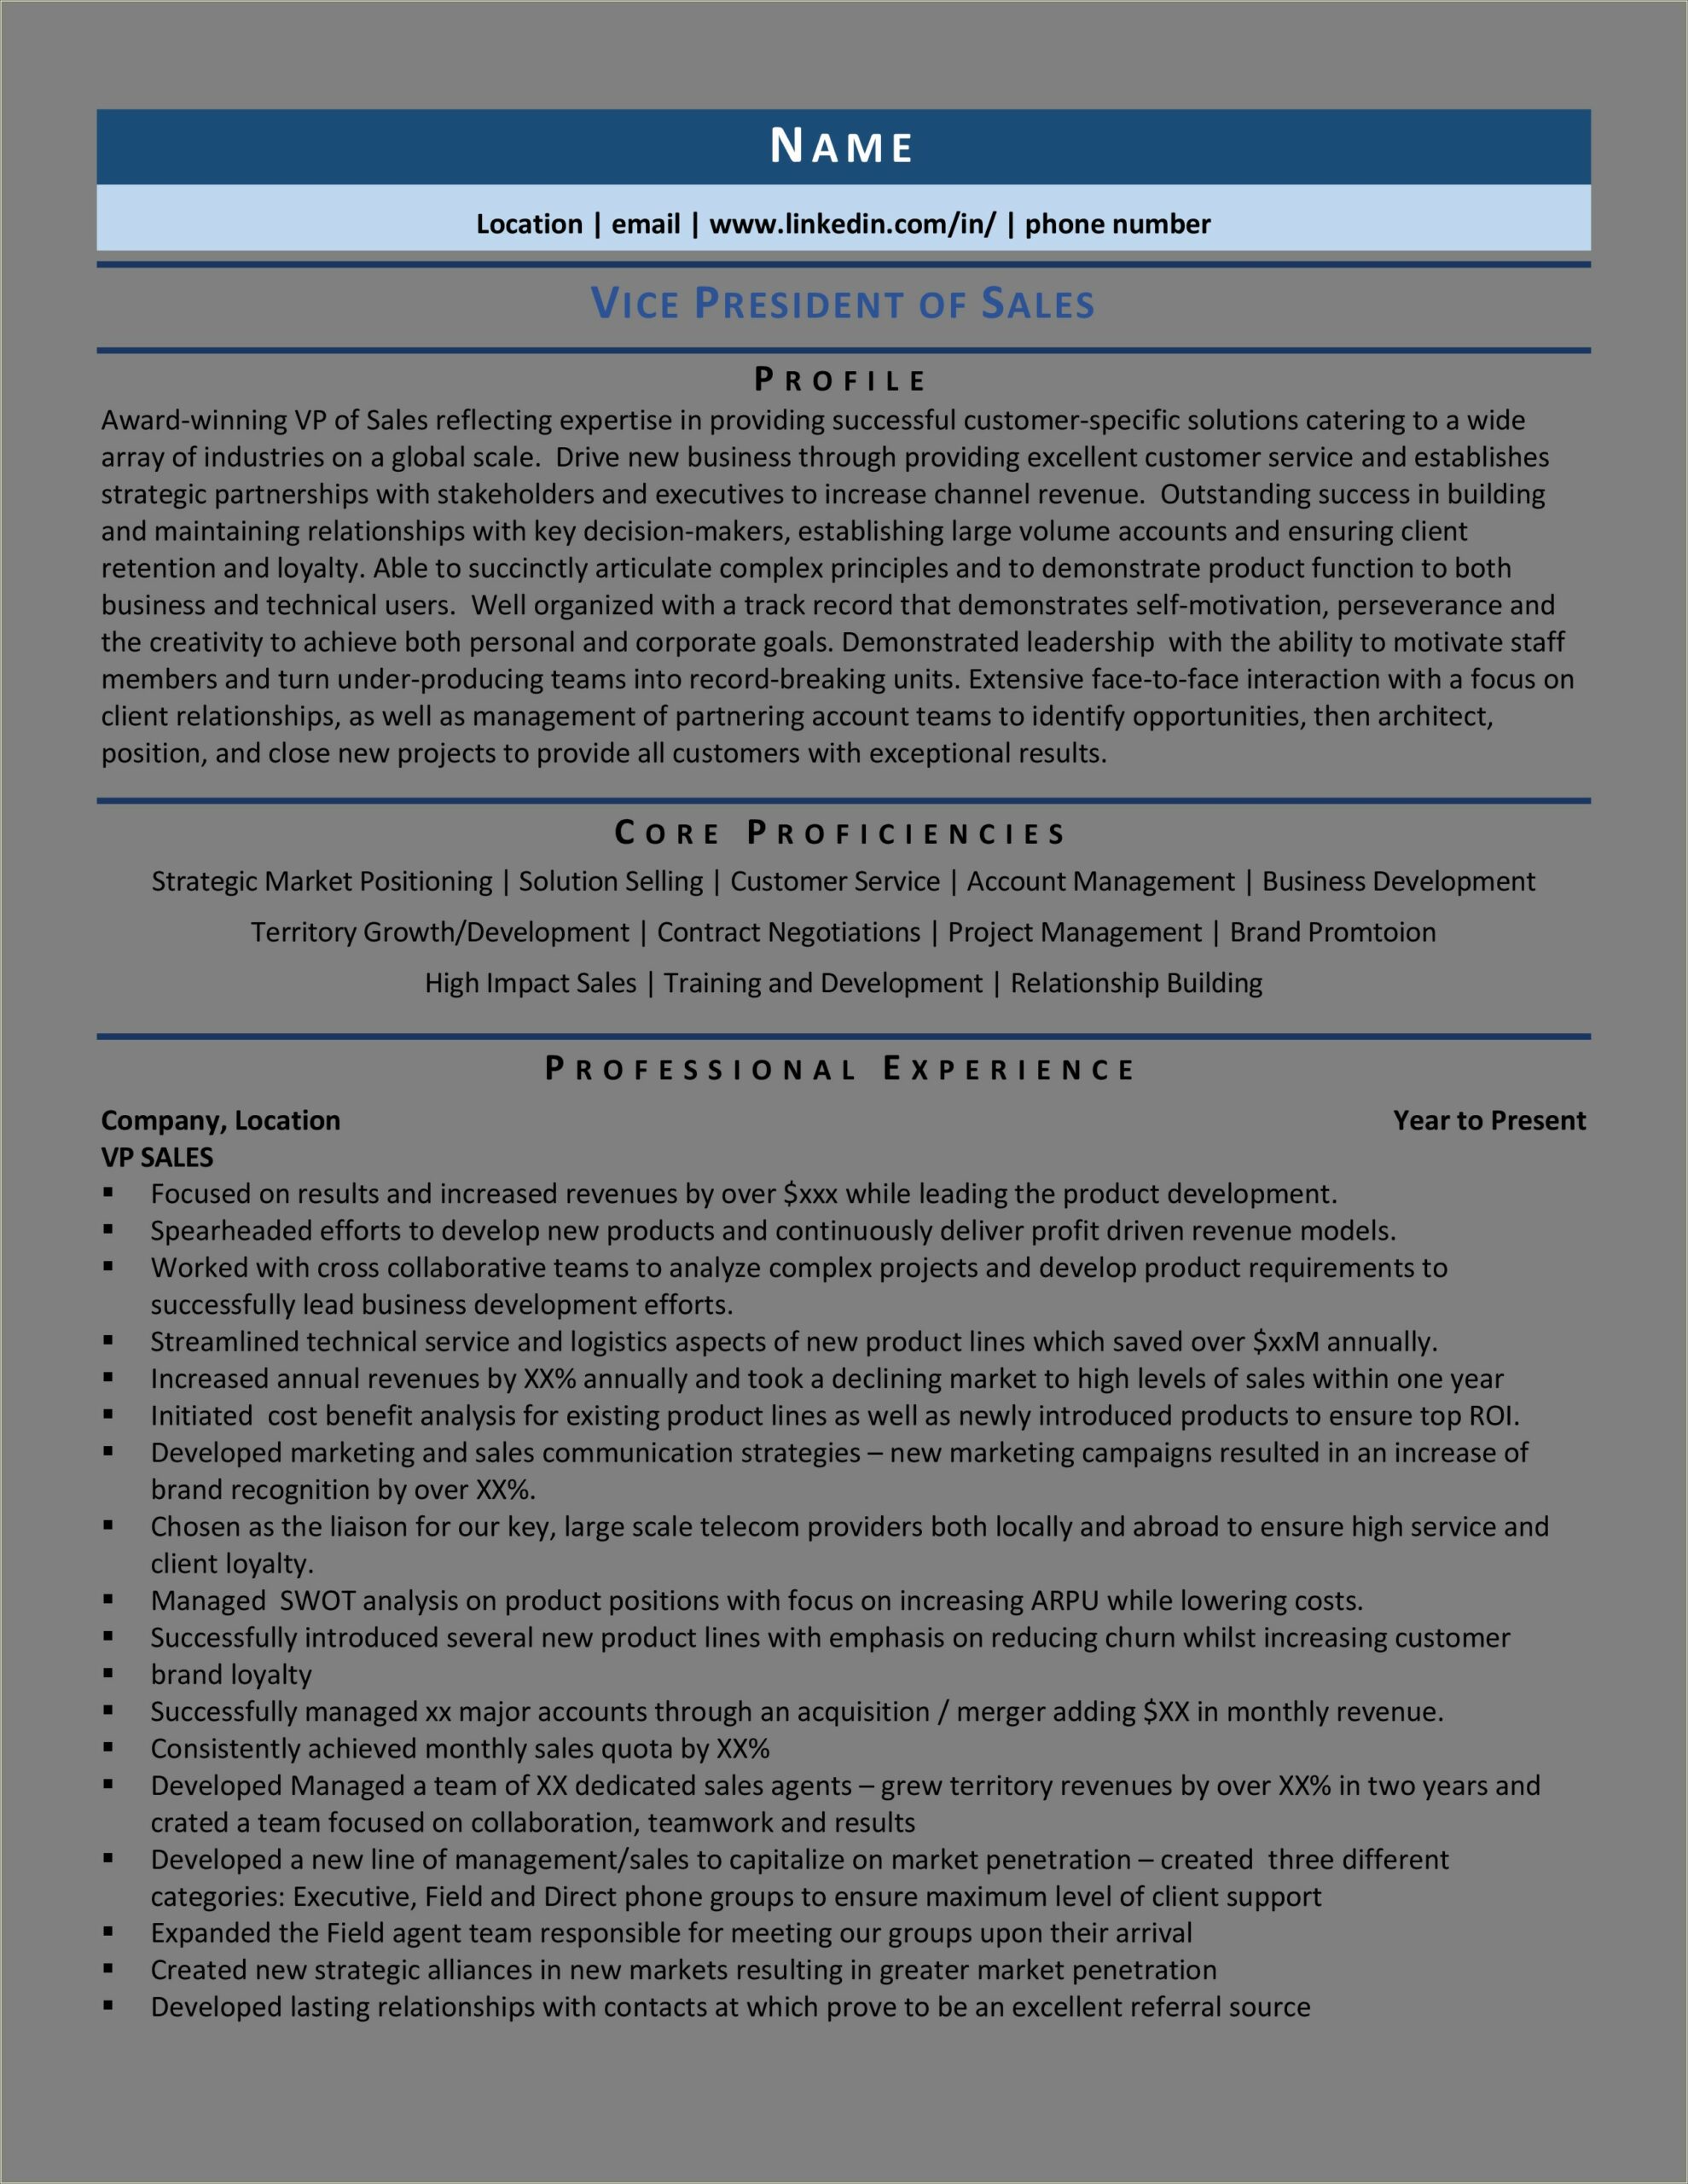 Job Resume Have To Be Chronological